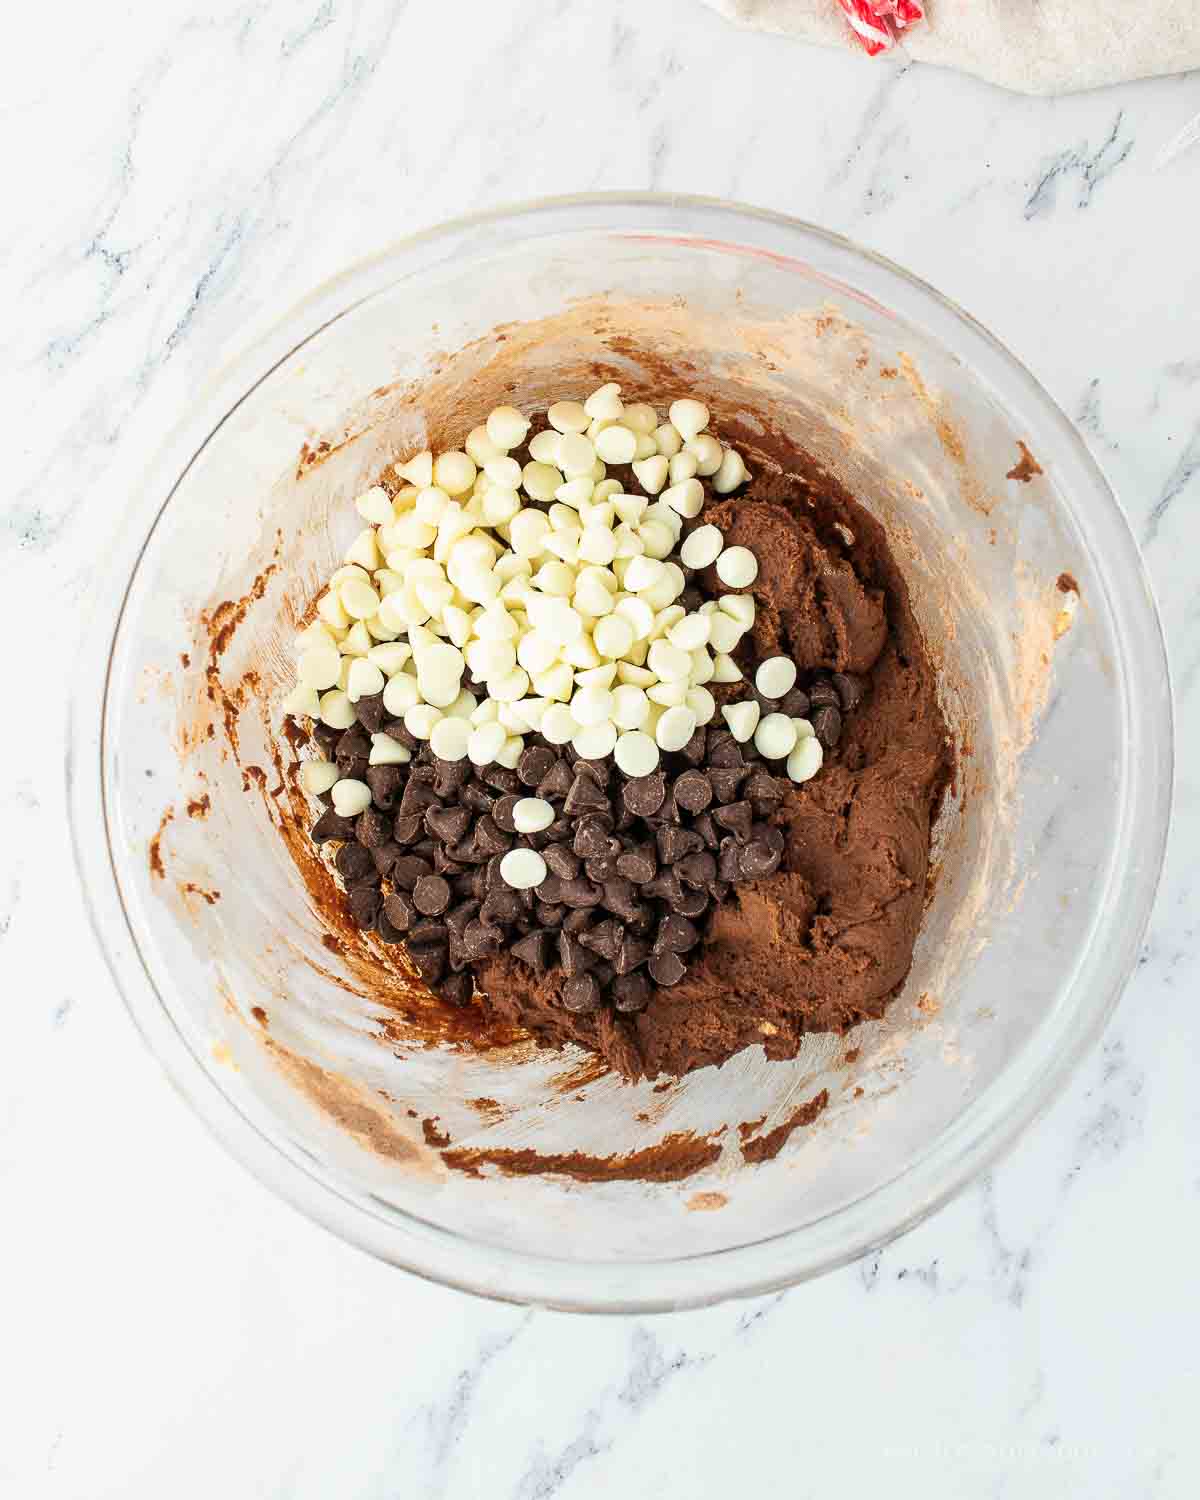 Chocolate chips and white chocolate chips added to chocolate cookie batter.